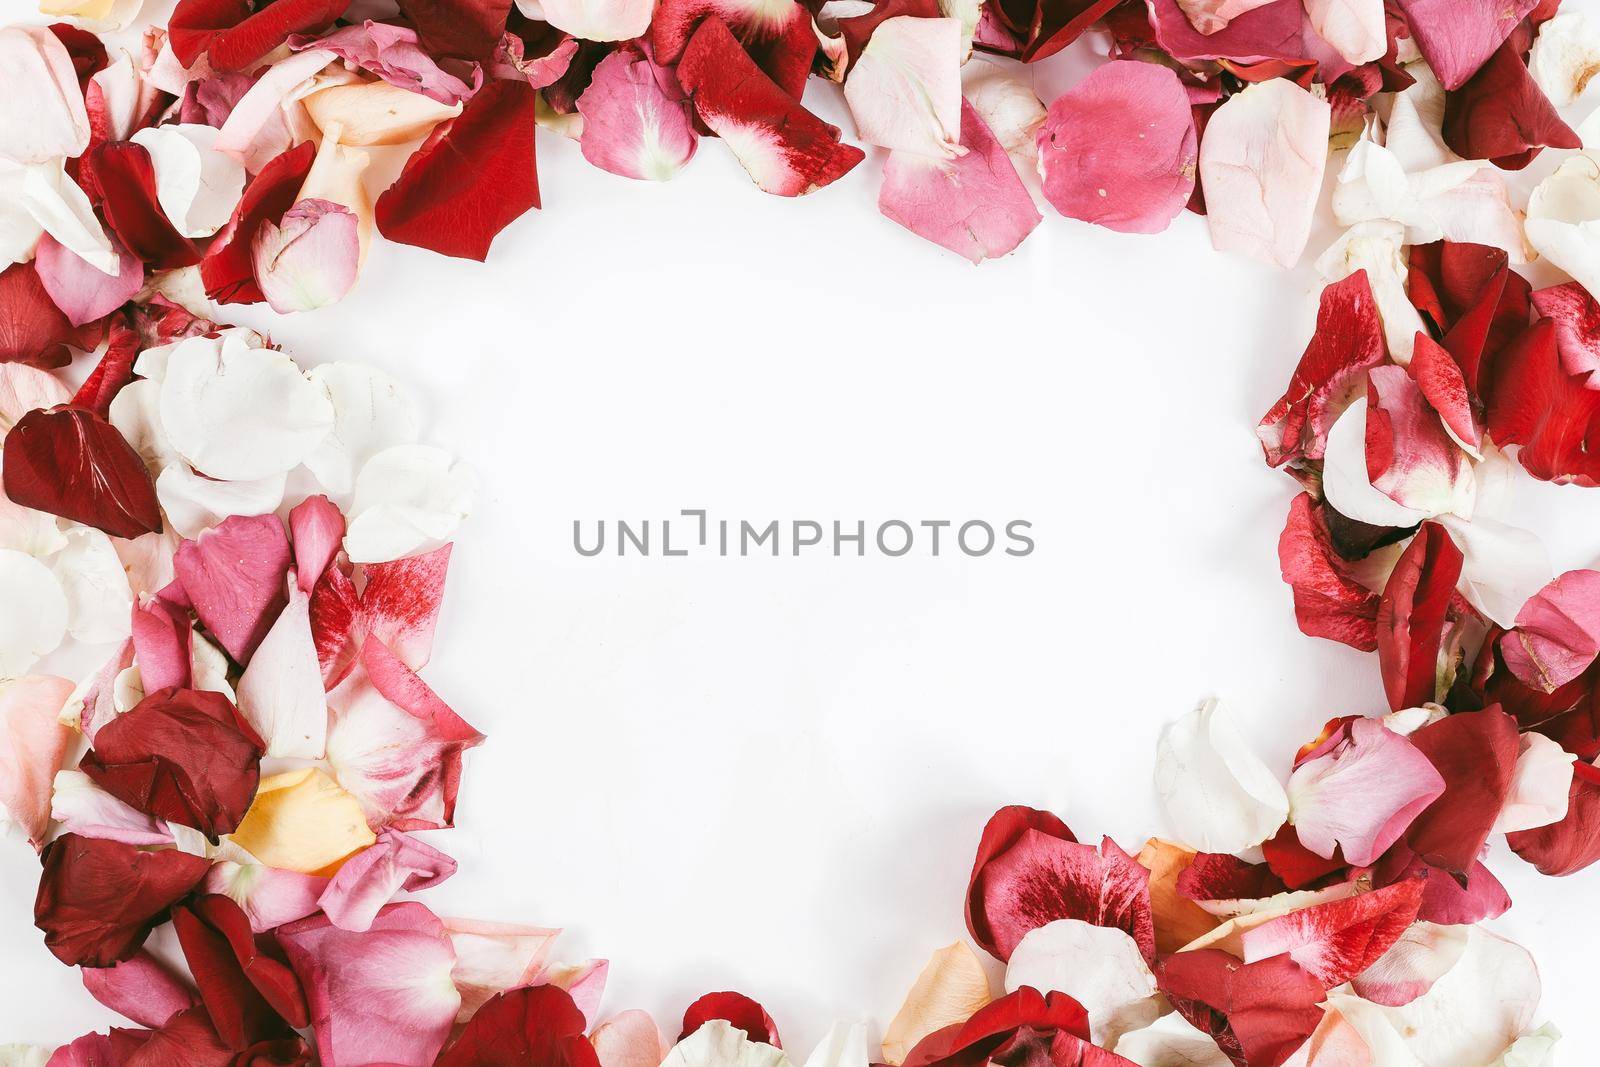 box with ring and rose petal frame on wooden background by SmartPhotoLab